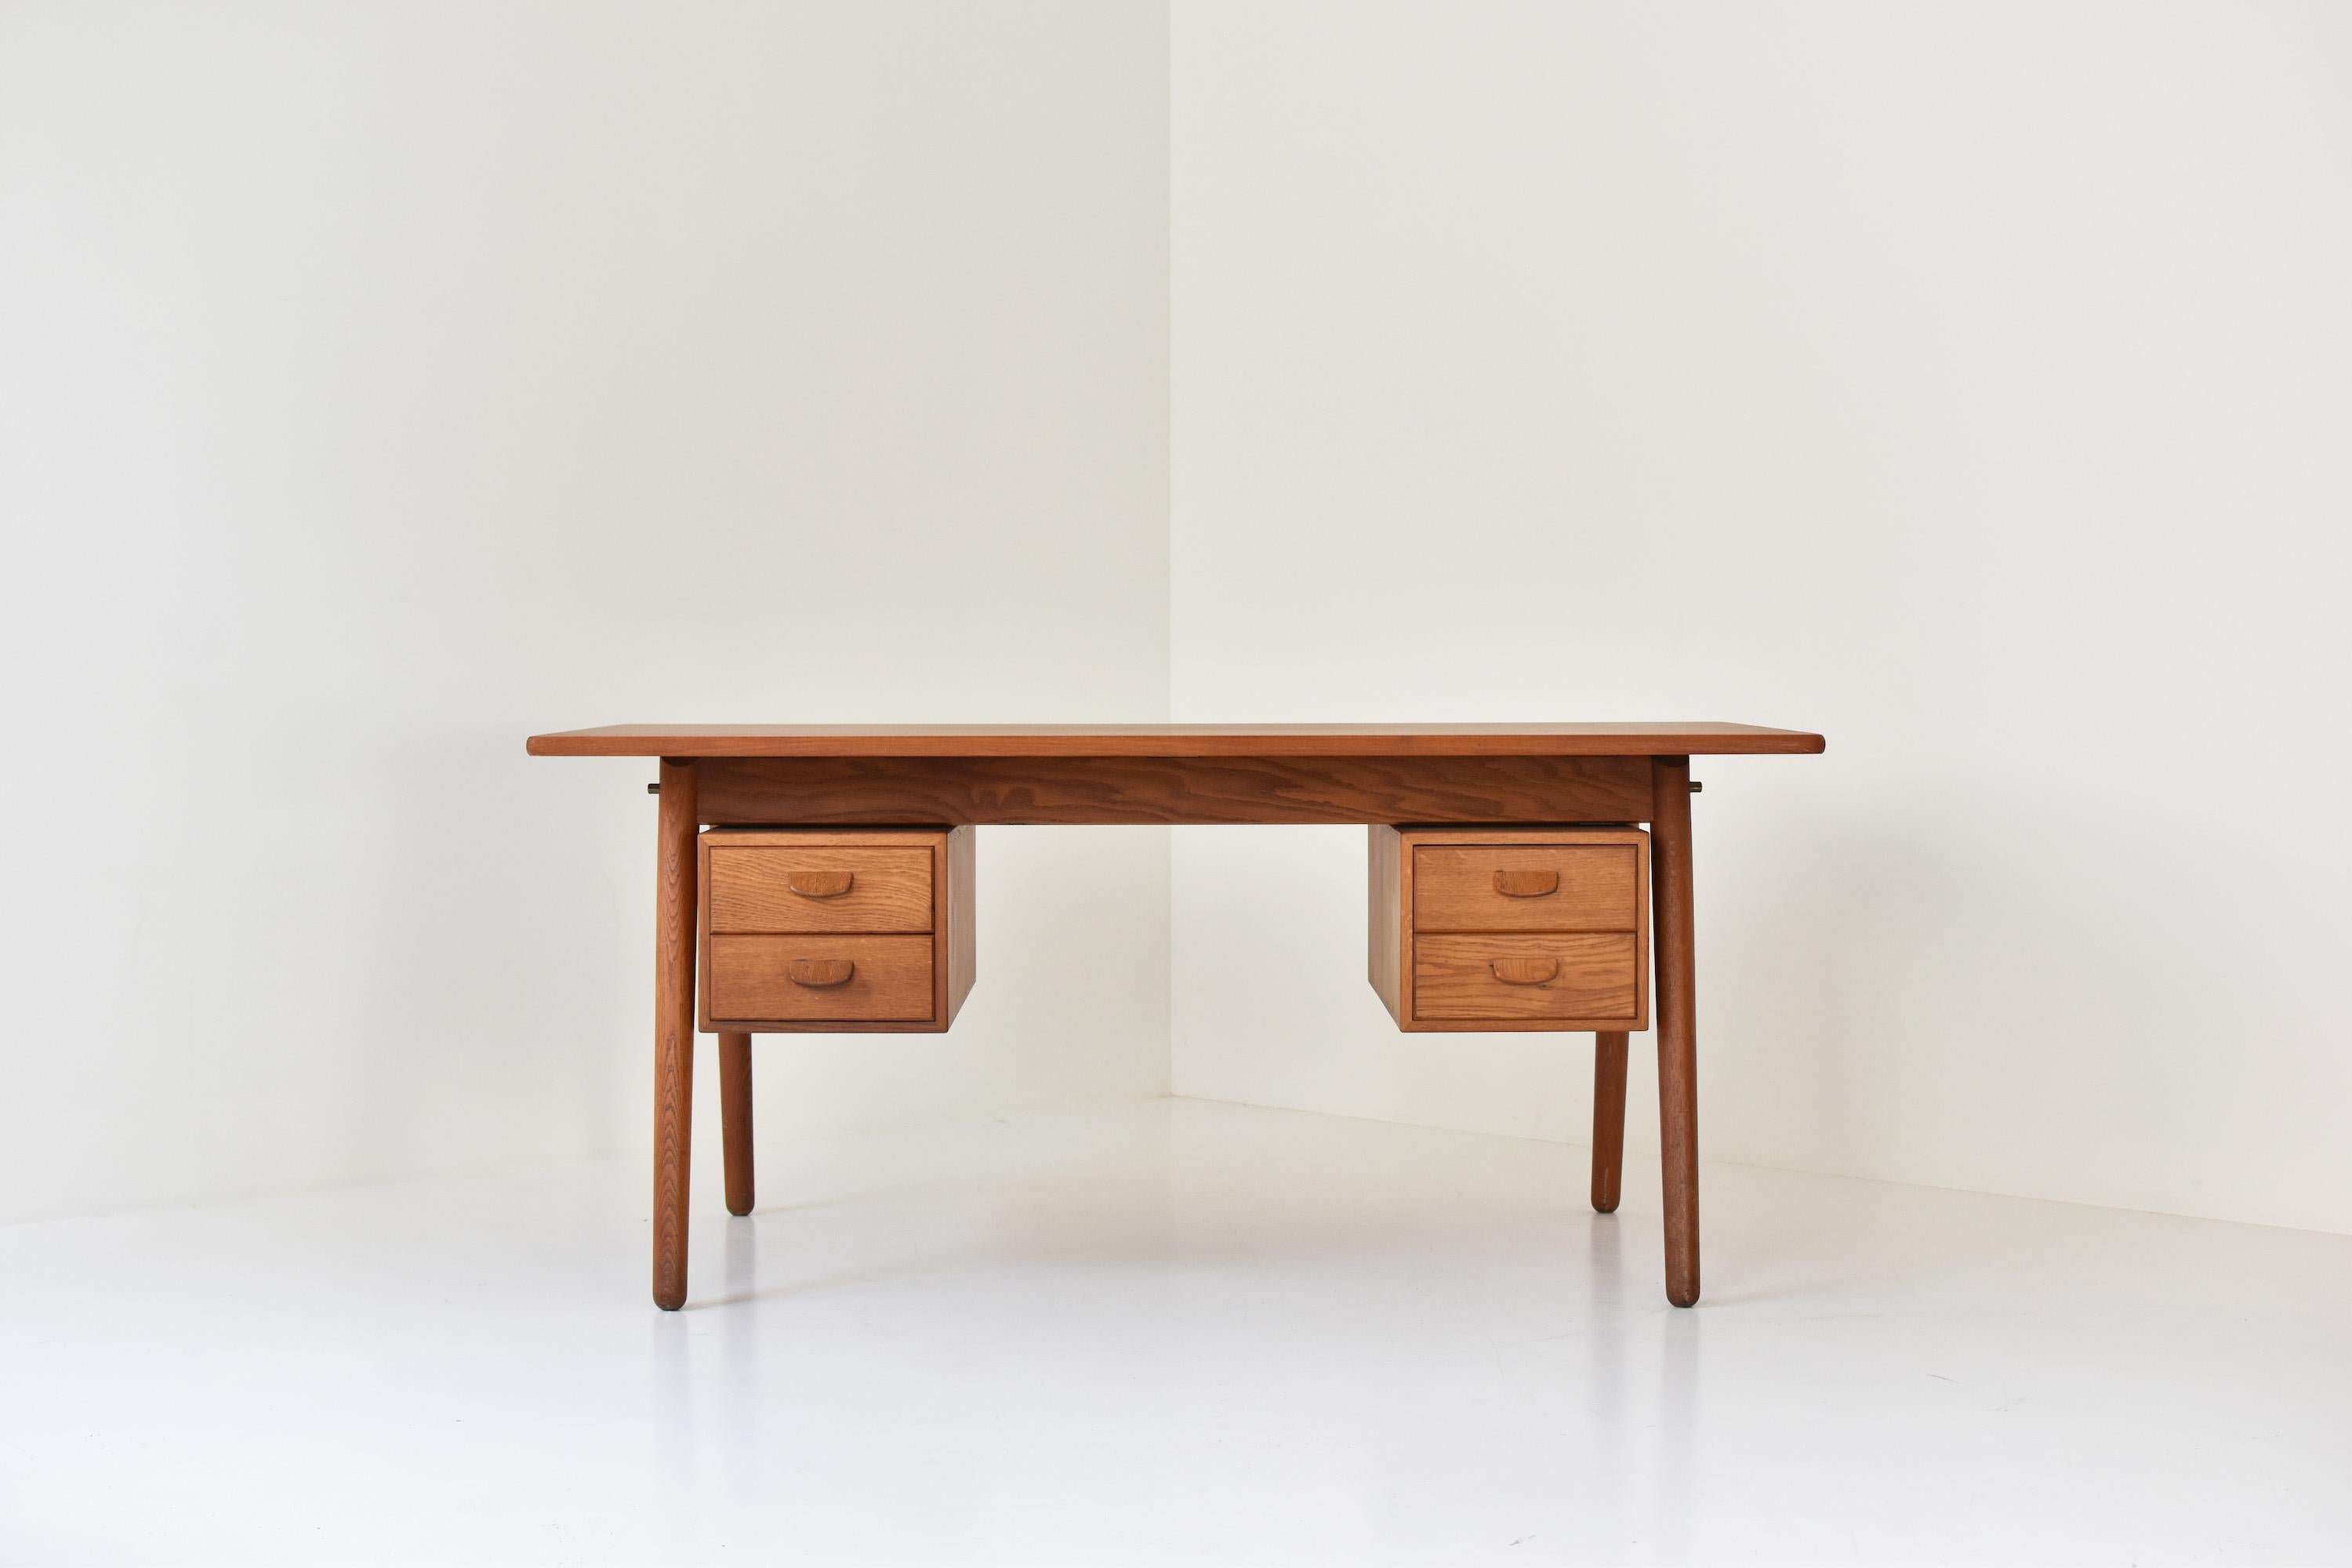 Interesting desk or dining table designed by Poul Volther for FDB Mobler, Denmark 1950’s. The top is made out of teak and is supported by a frame with four legs in oak. The two drawer sections are also made out of oak and can be switched from front